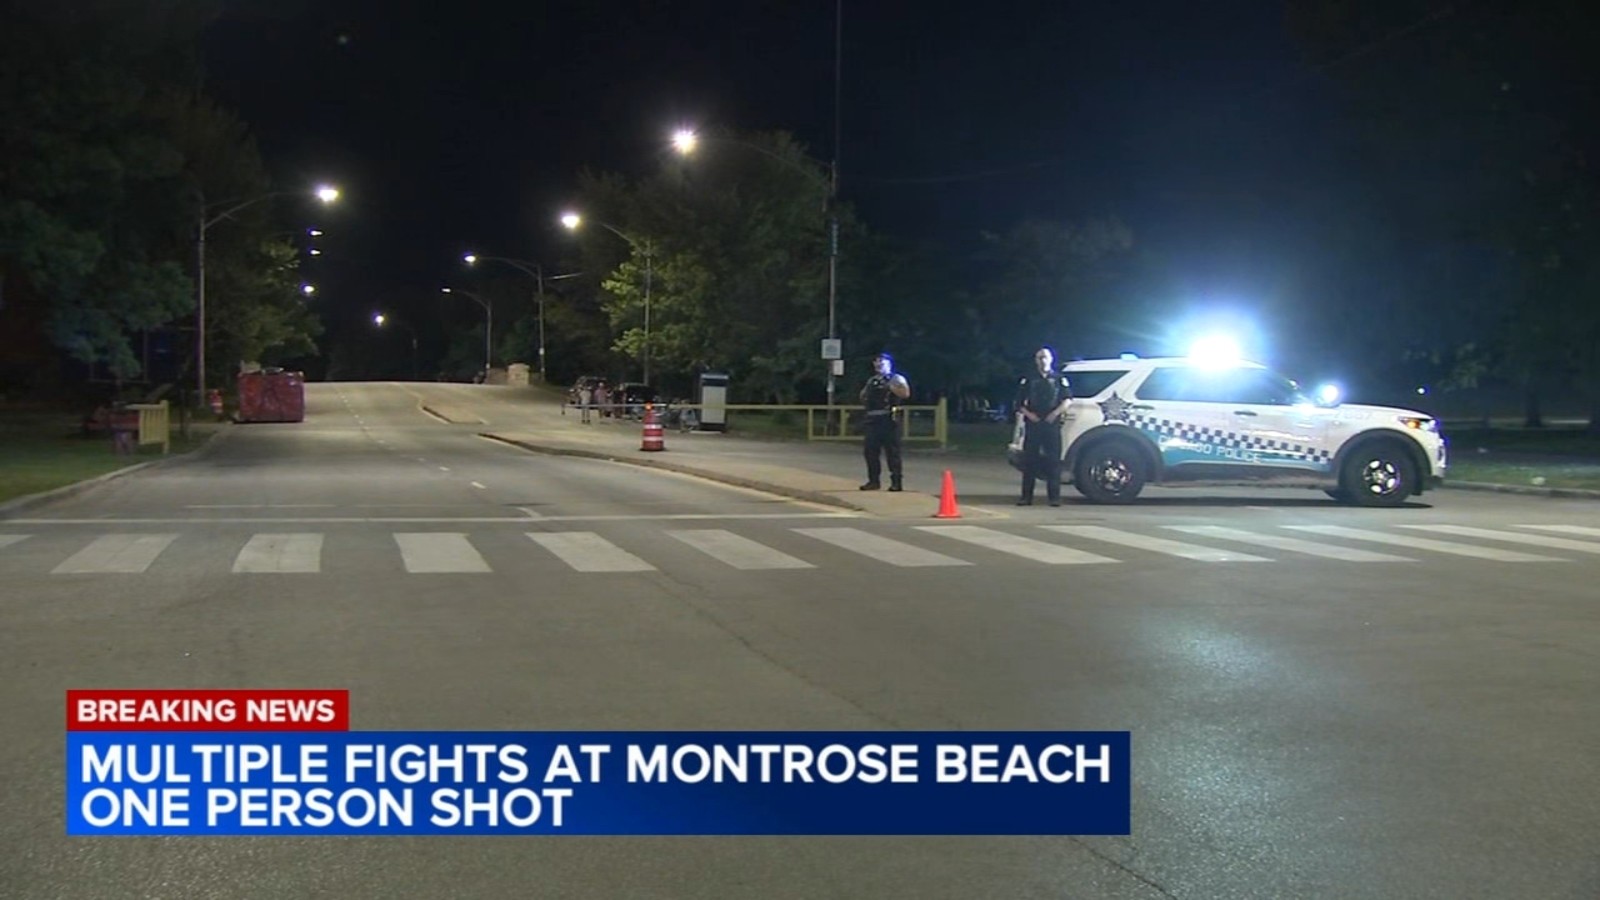 Person shot after multiple fights at Montrose Beach, Chicago authorities say